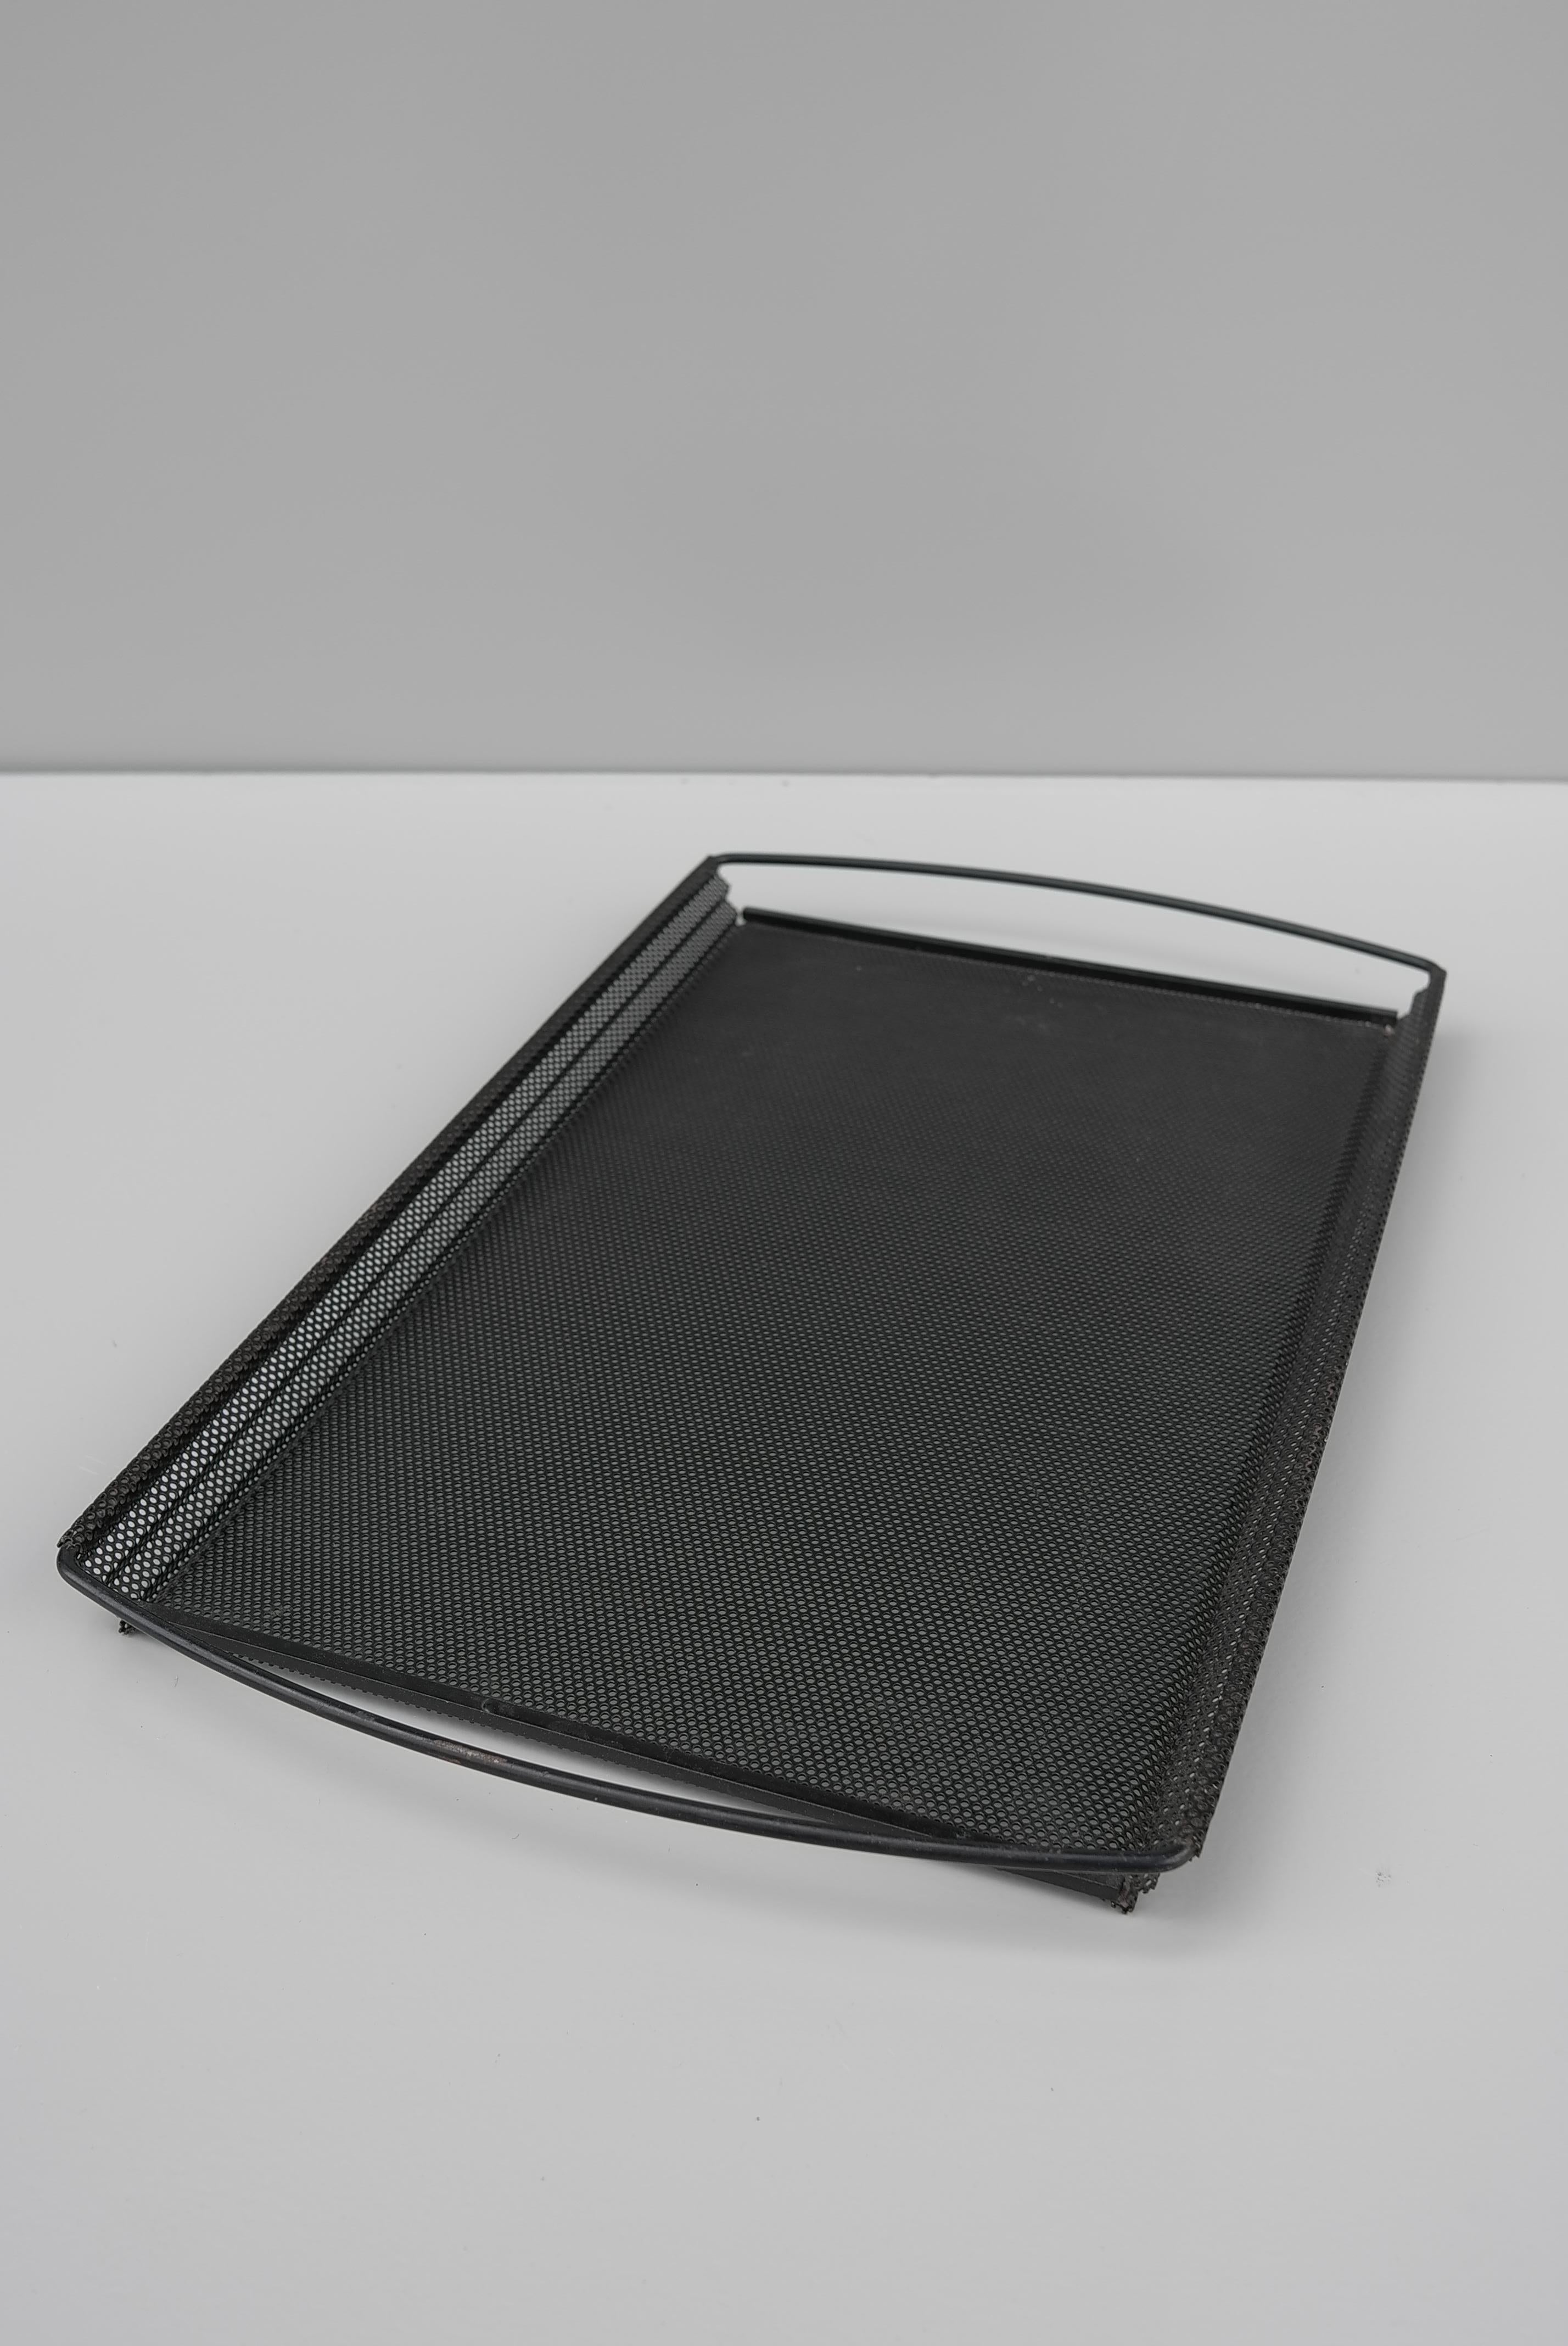 Steel Rare Mathieu Matégot Rigitulle Black Perforated Serving Tray, France, 1950s For Sale